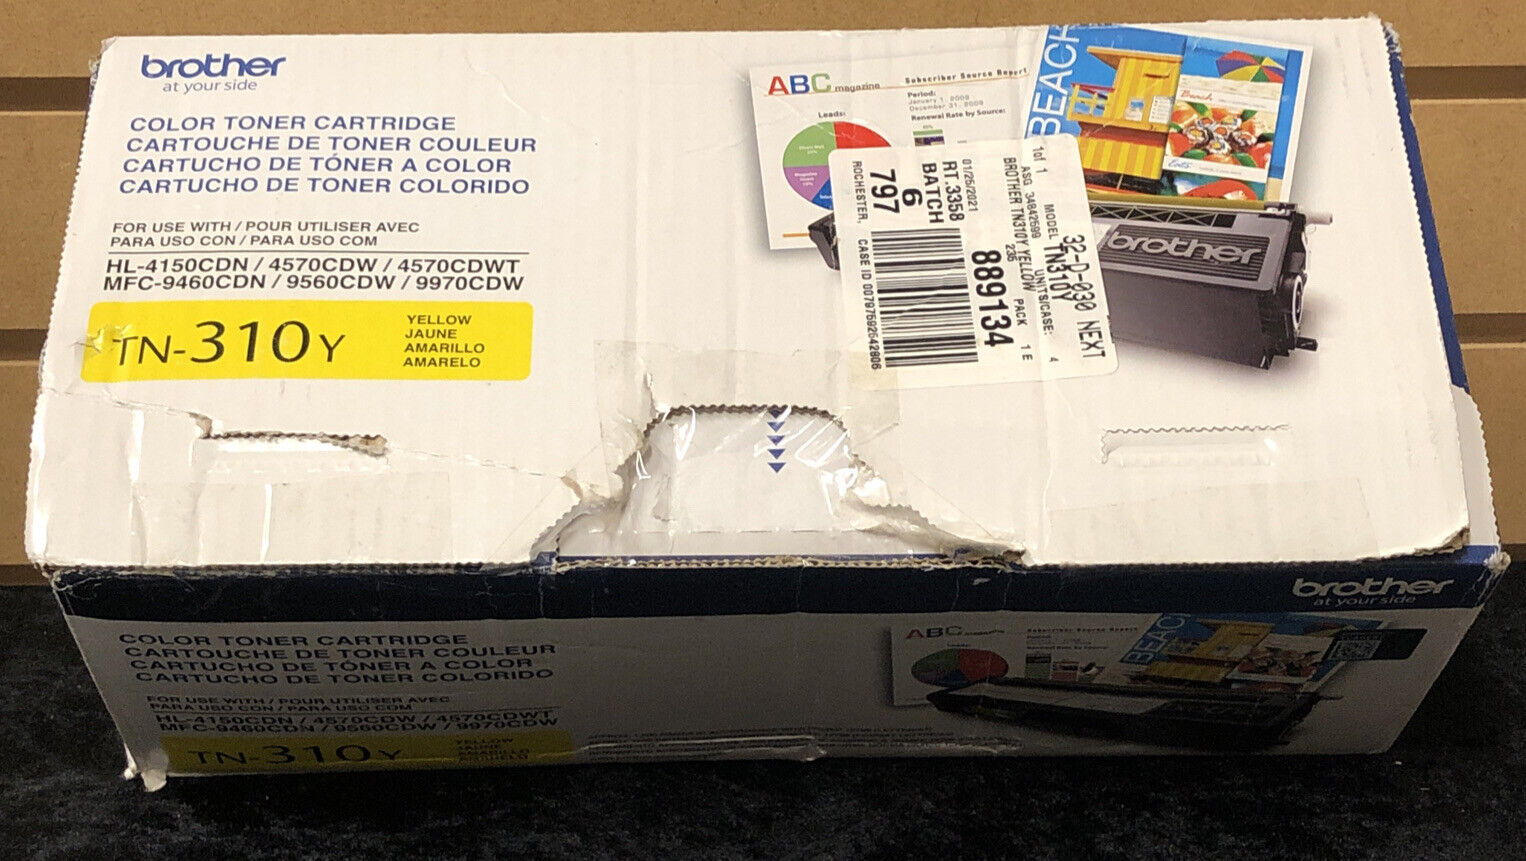 BROTHER TN-310Y YELLOW Color Toner Cartridge (DAMAGED BOX -PLEASE SEE PICTURES)